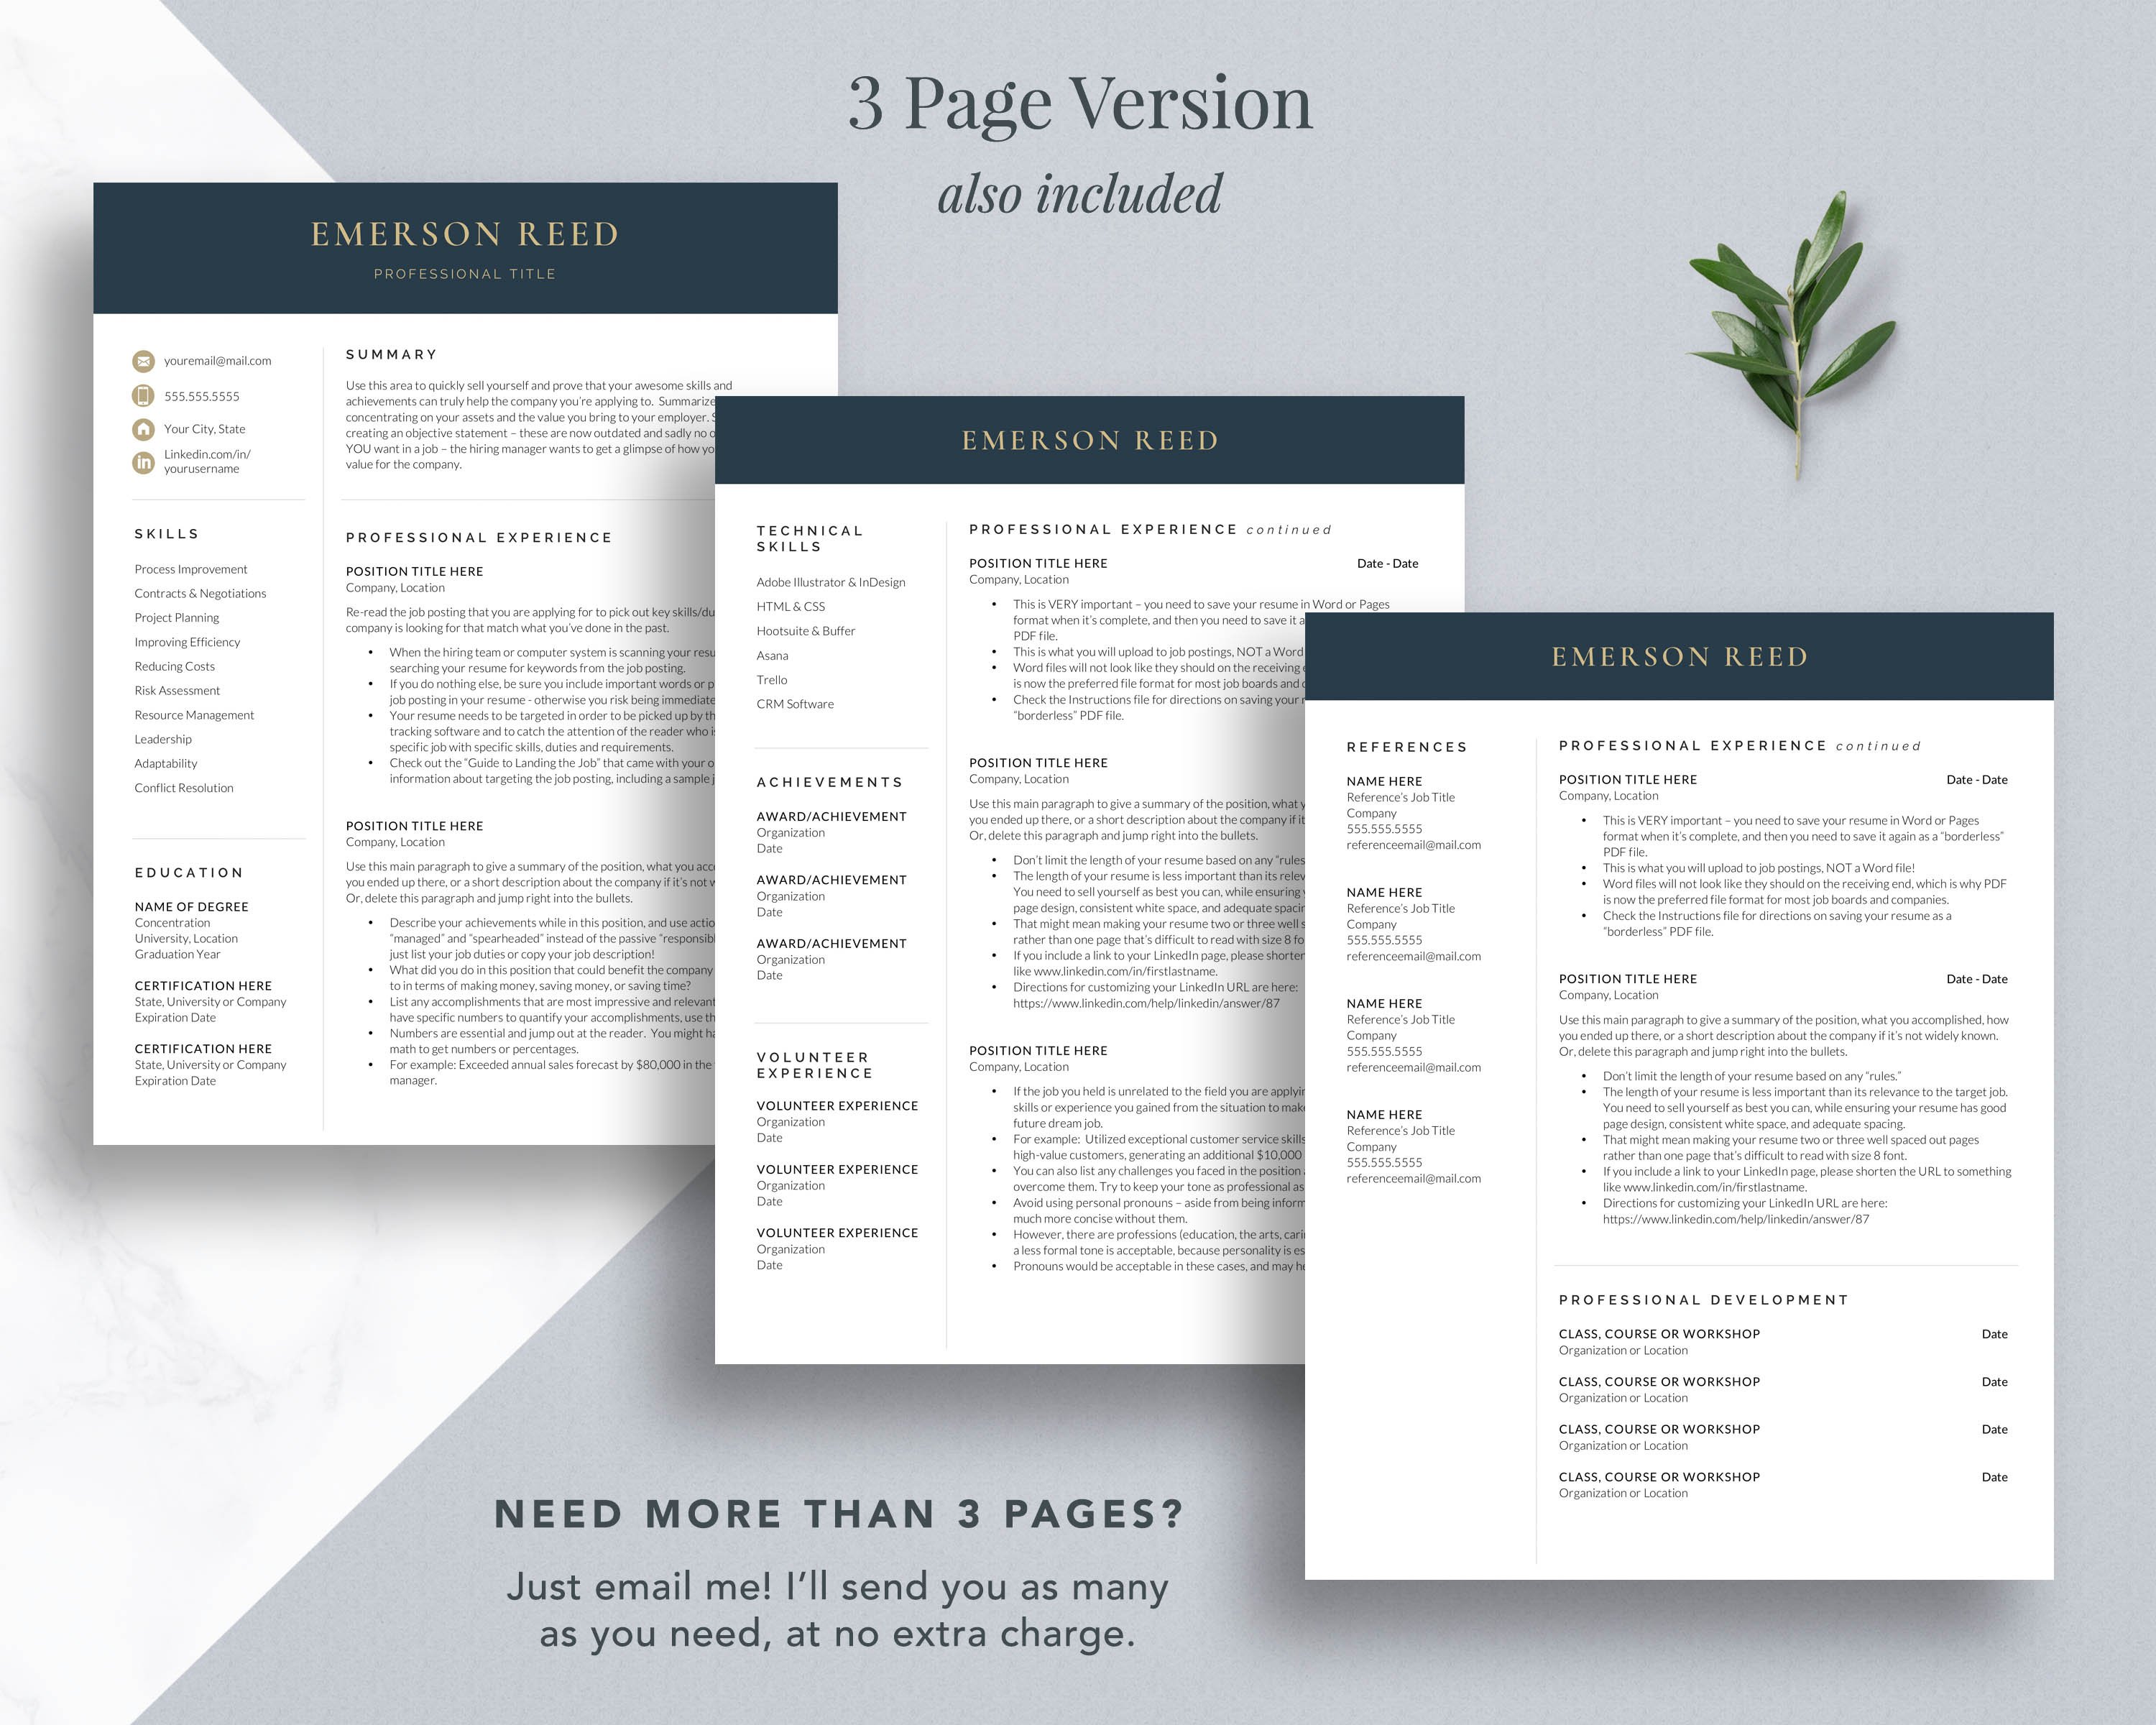 ceo resume template 2020 2021 130